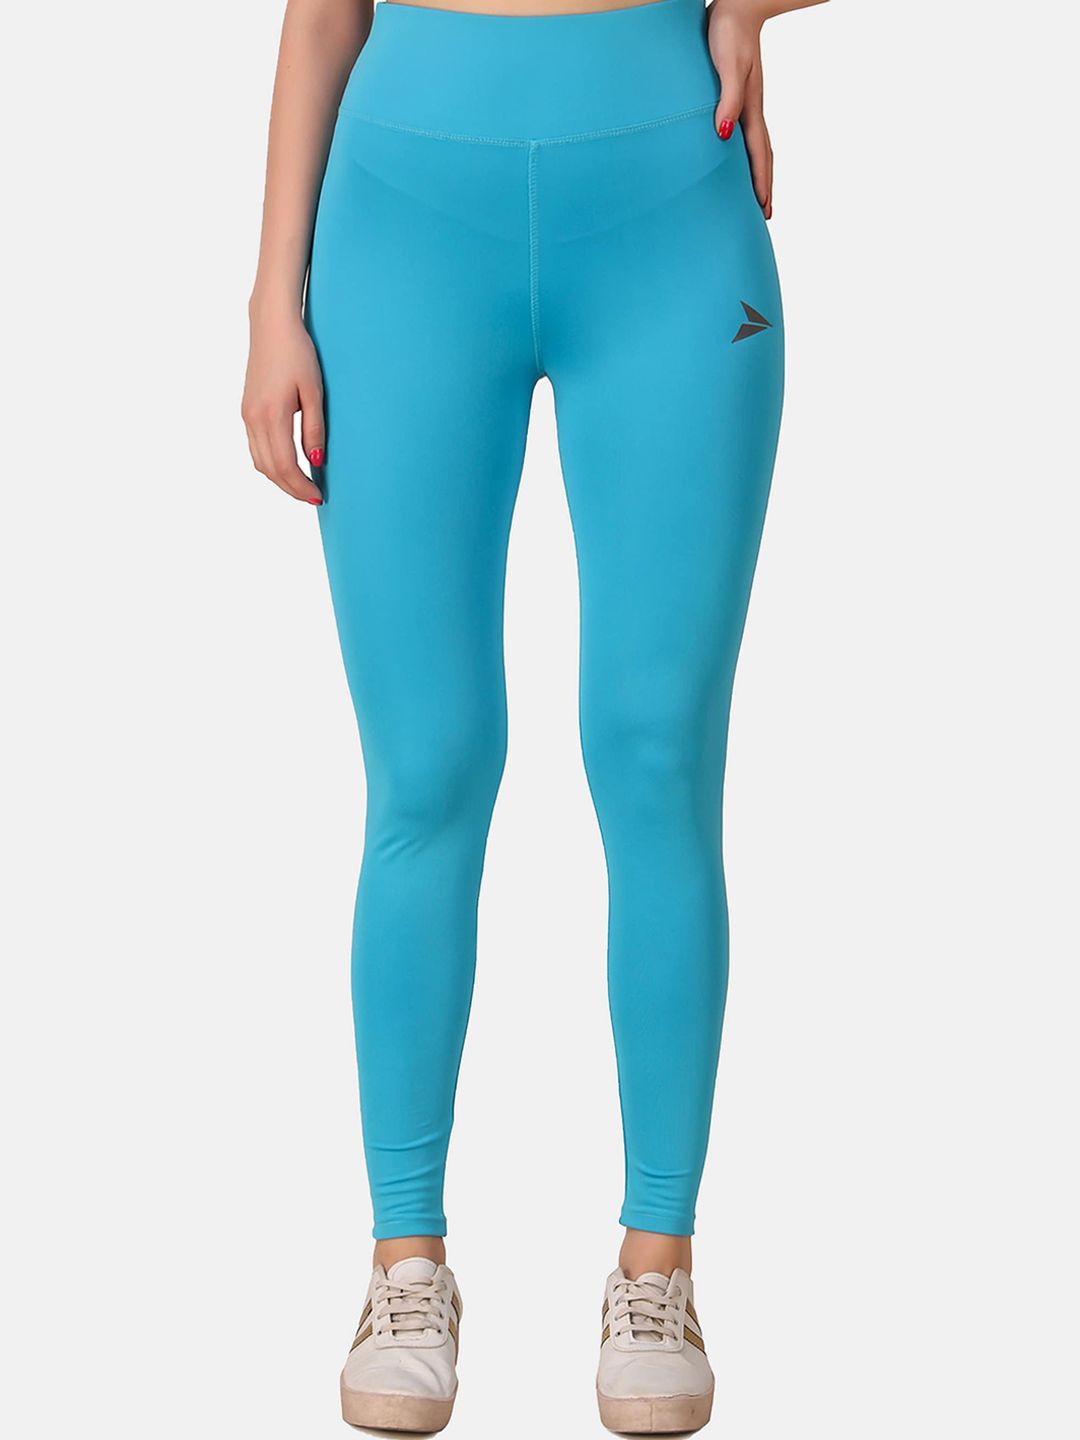 FITINC Women Sky Blue Solid Activewear Tights Price in India